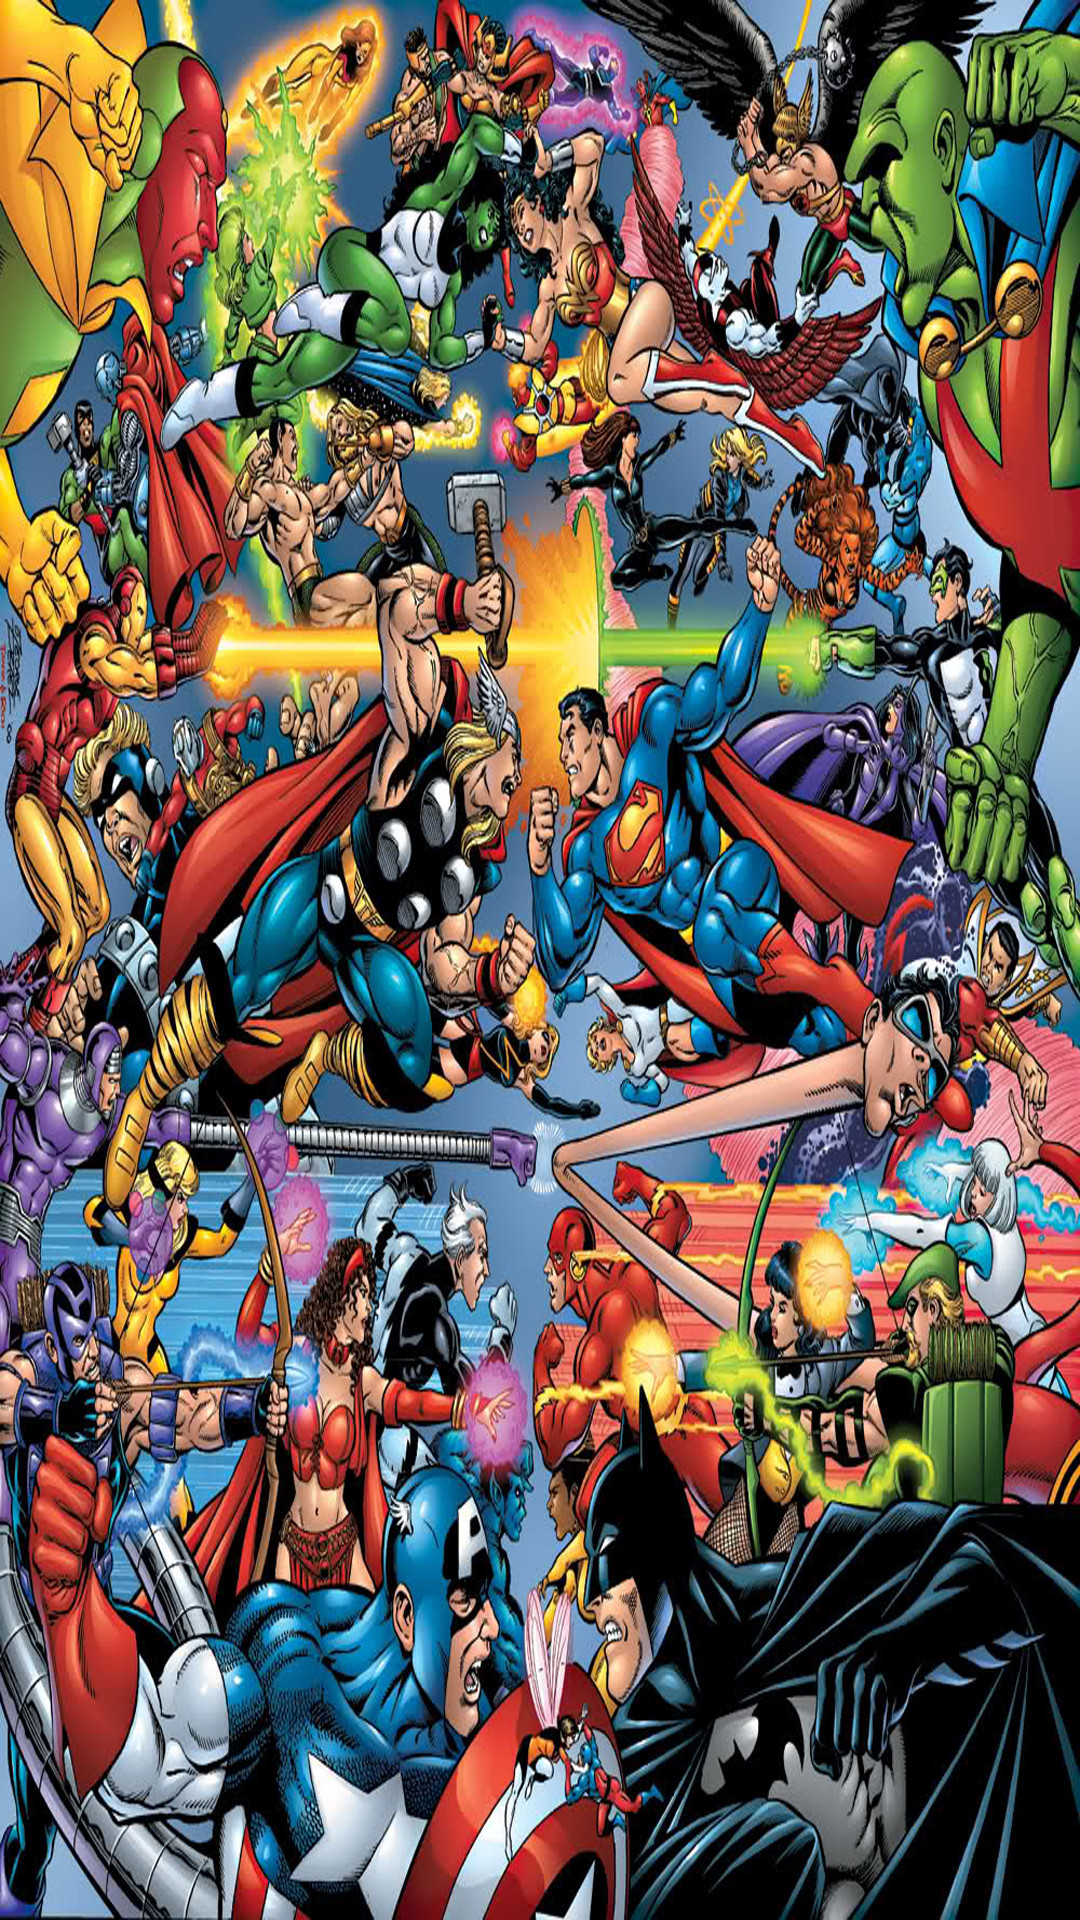 Marvel Phone Wallpapers 70 Images - George Perez Justice League Vs Avengers - HD Wallpaper 